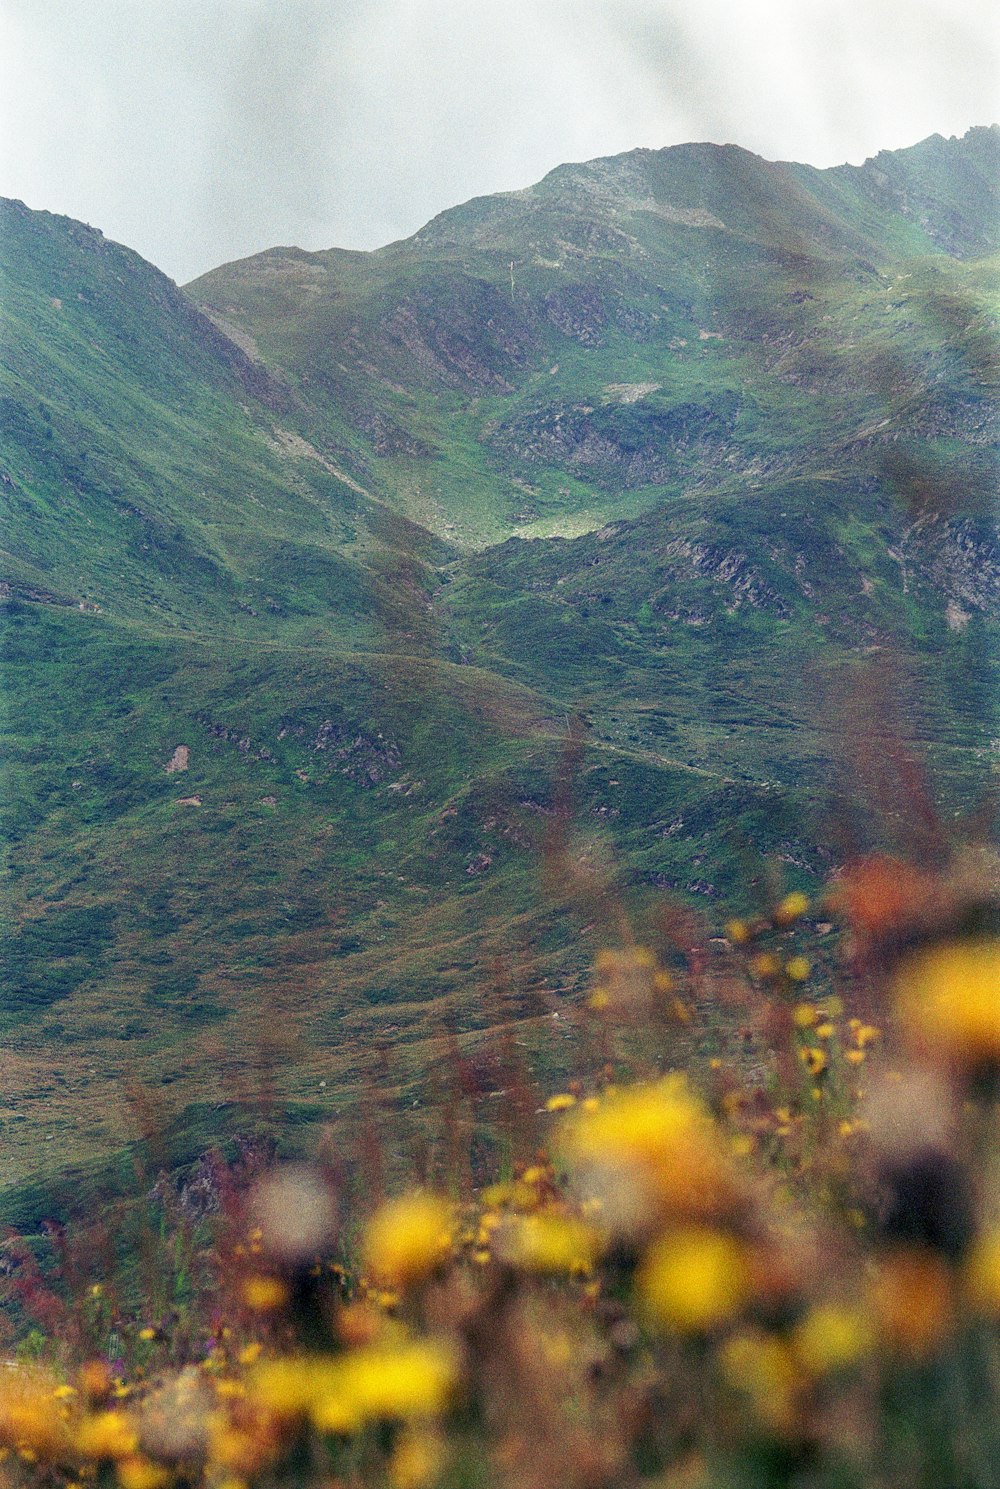 a view of a mountain with yellow flowers in the foreground